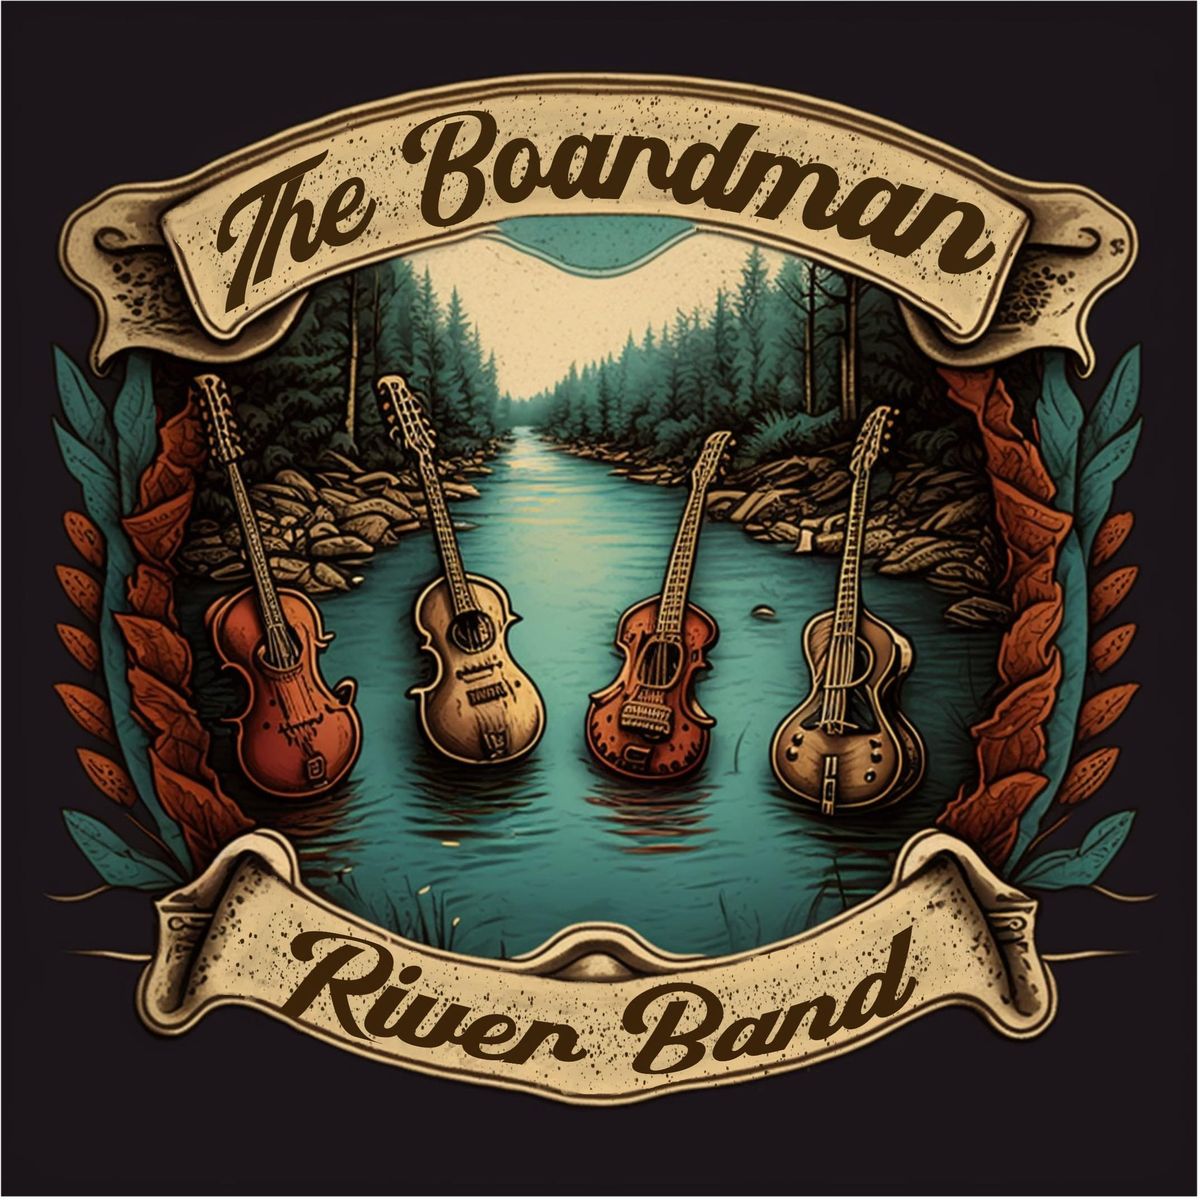 The Boardman River Band \/\/ The Workshop Brewing Co